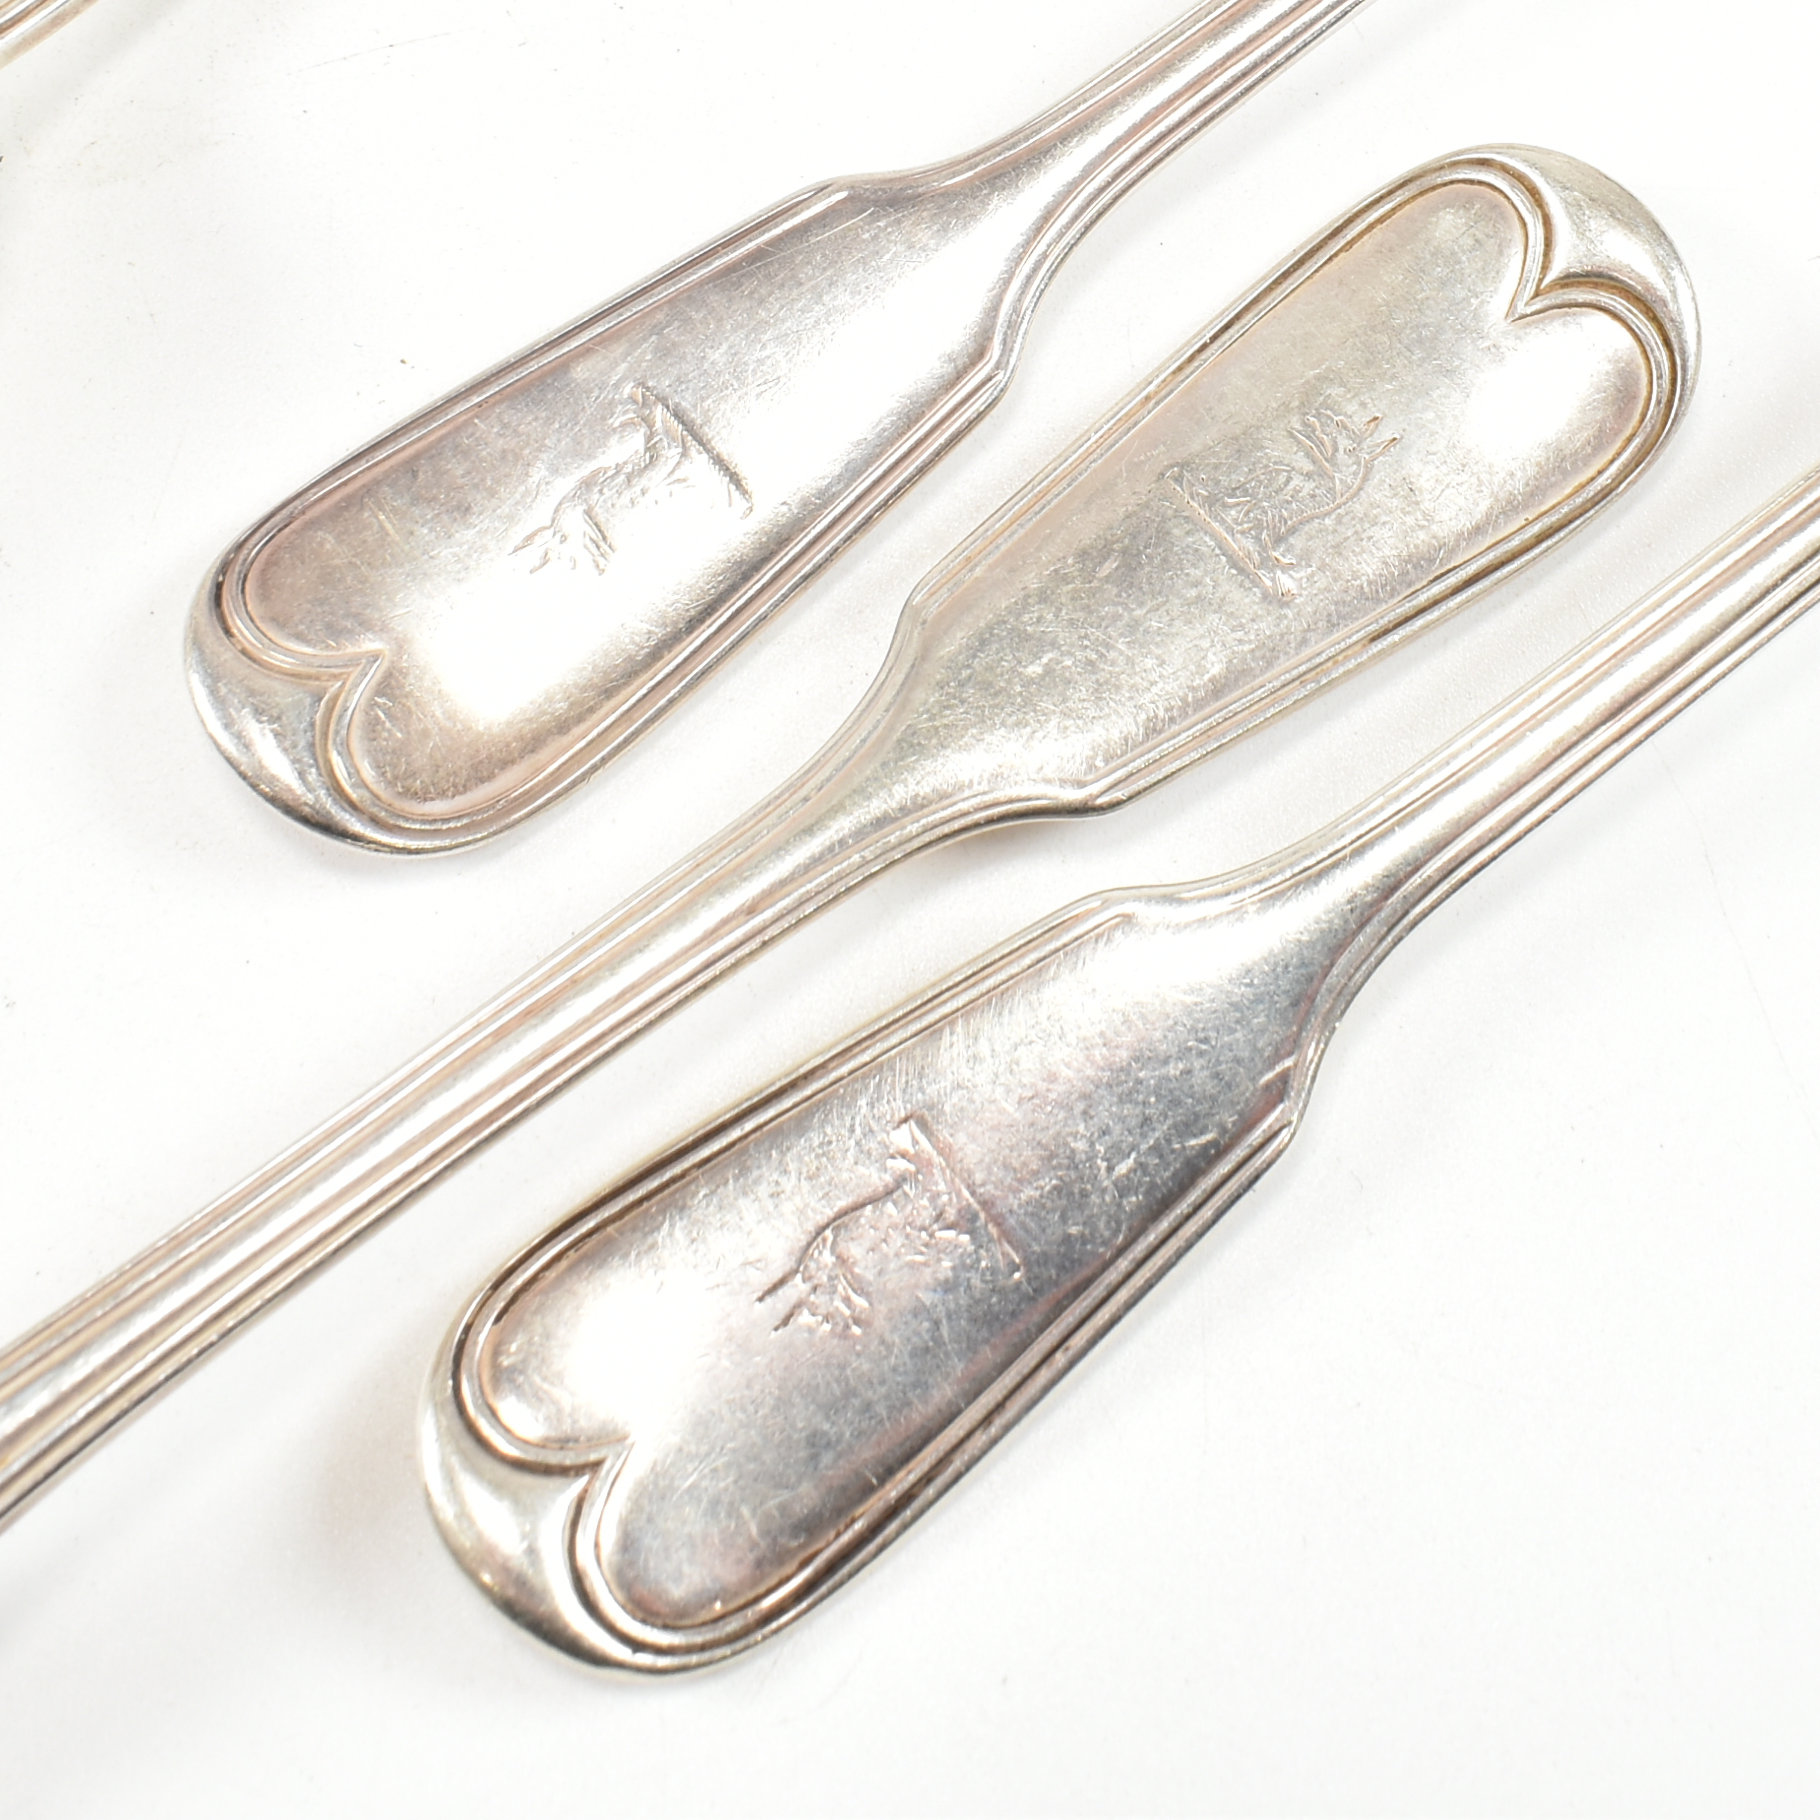 6 VICTORIAN HALLMARKED SILVER FORKS - Image 6 of 6